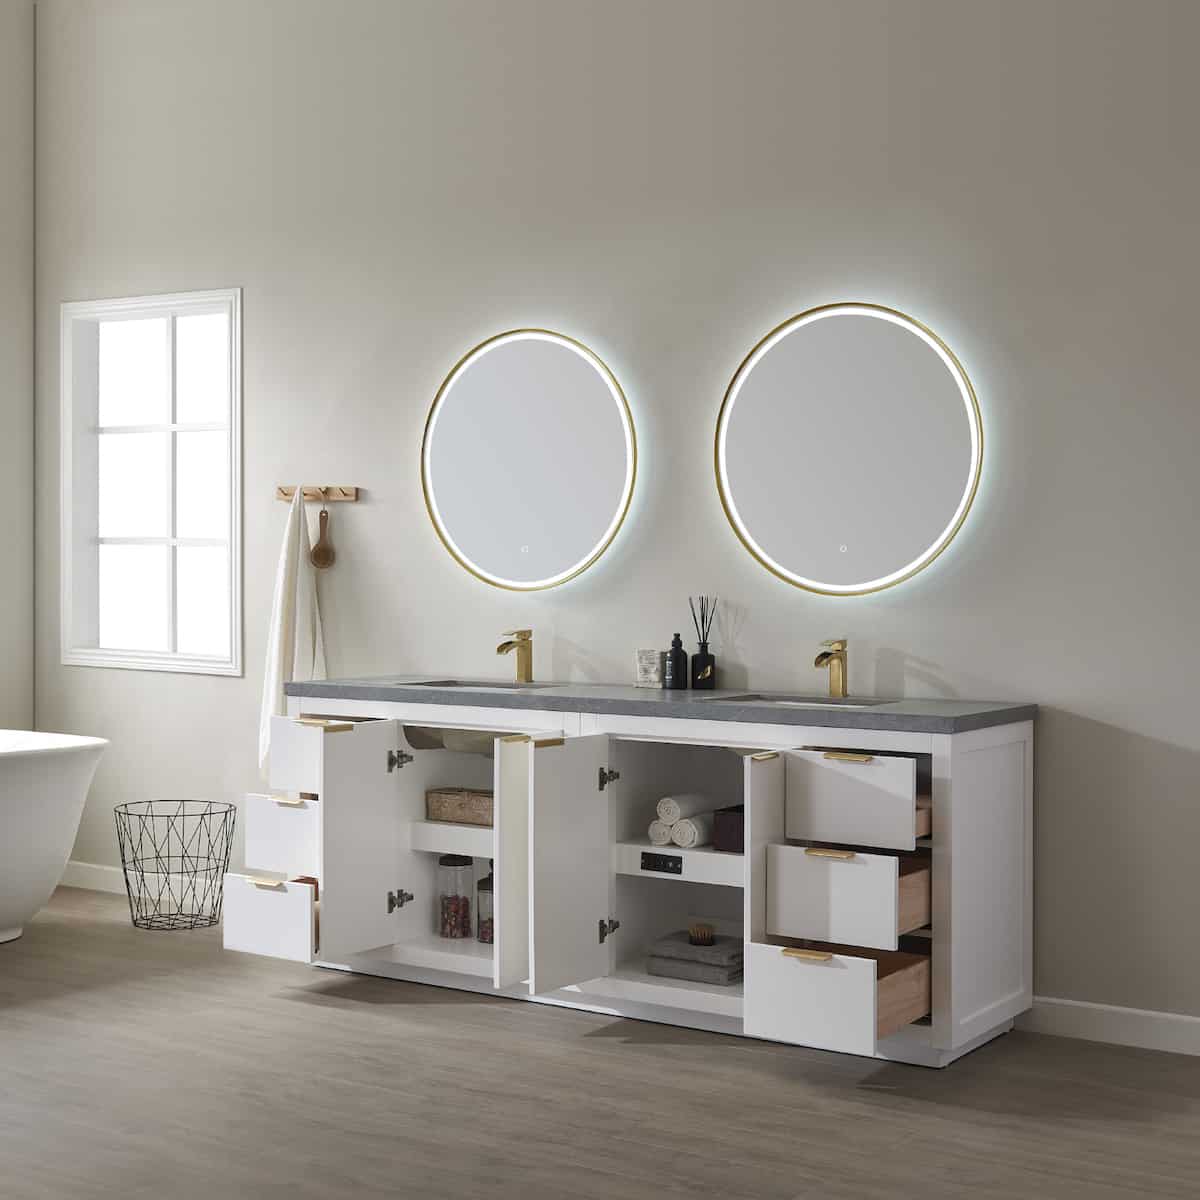 Vinnova Leiza 84 Inch Freestanding Double Vanity in White with Grey Sintered Stone Countertop With Mirror Inside 701584-WH-ALB